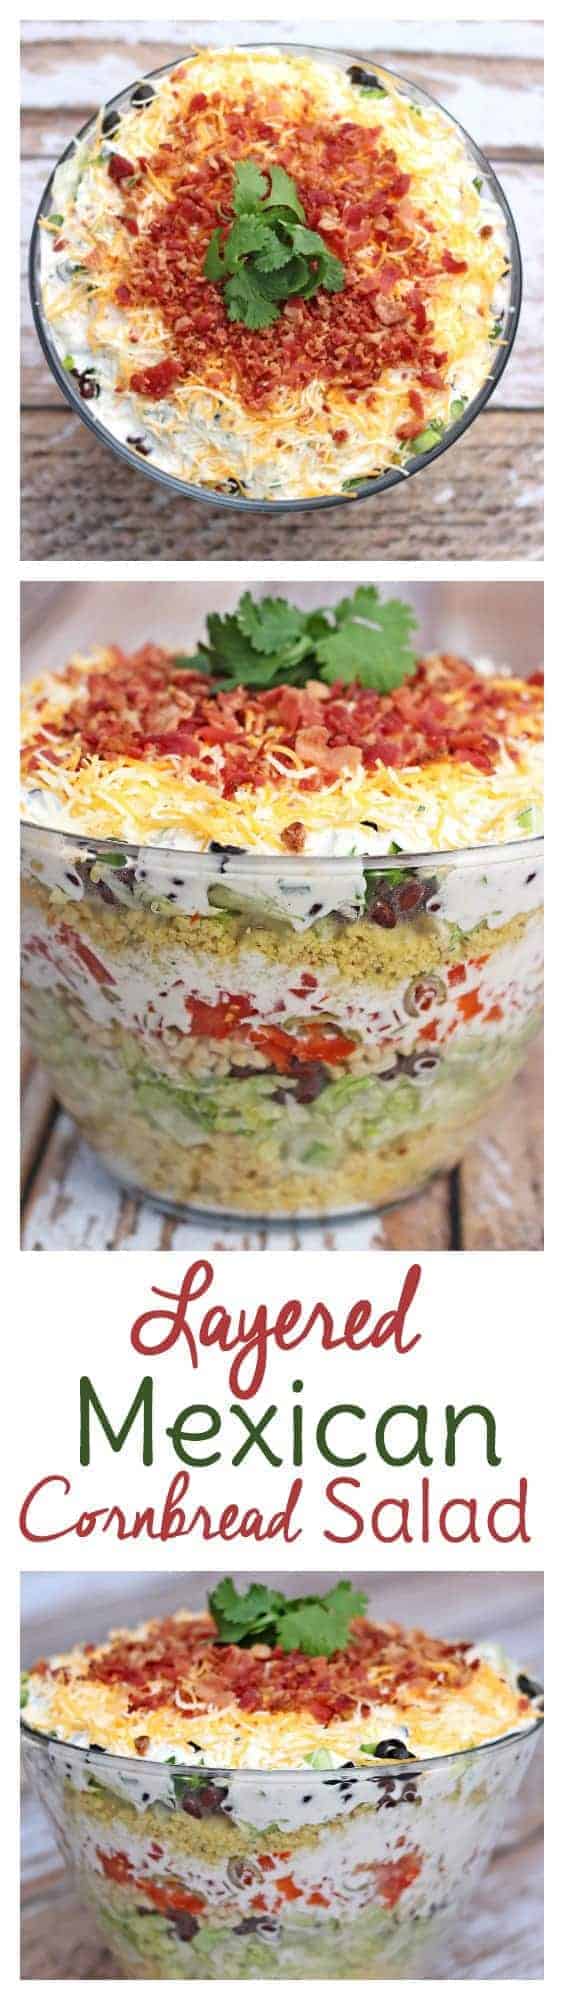 This Layered Mexican Cornbread Casserole Recipe is HUGE hit at potlucks. There are never leftovers!